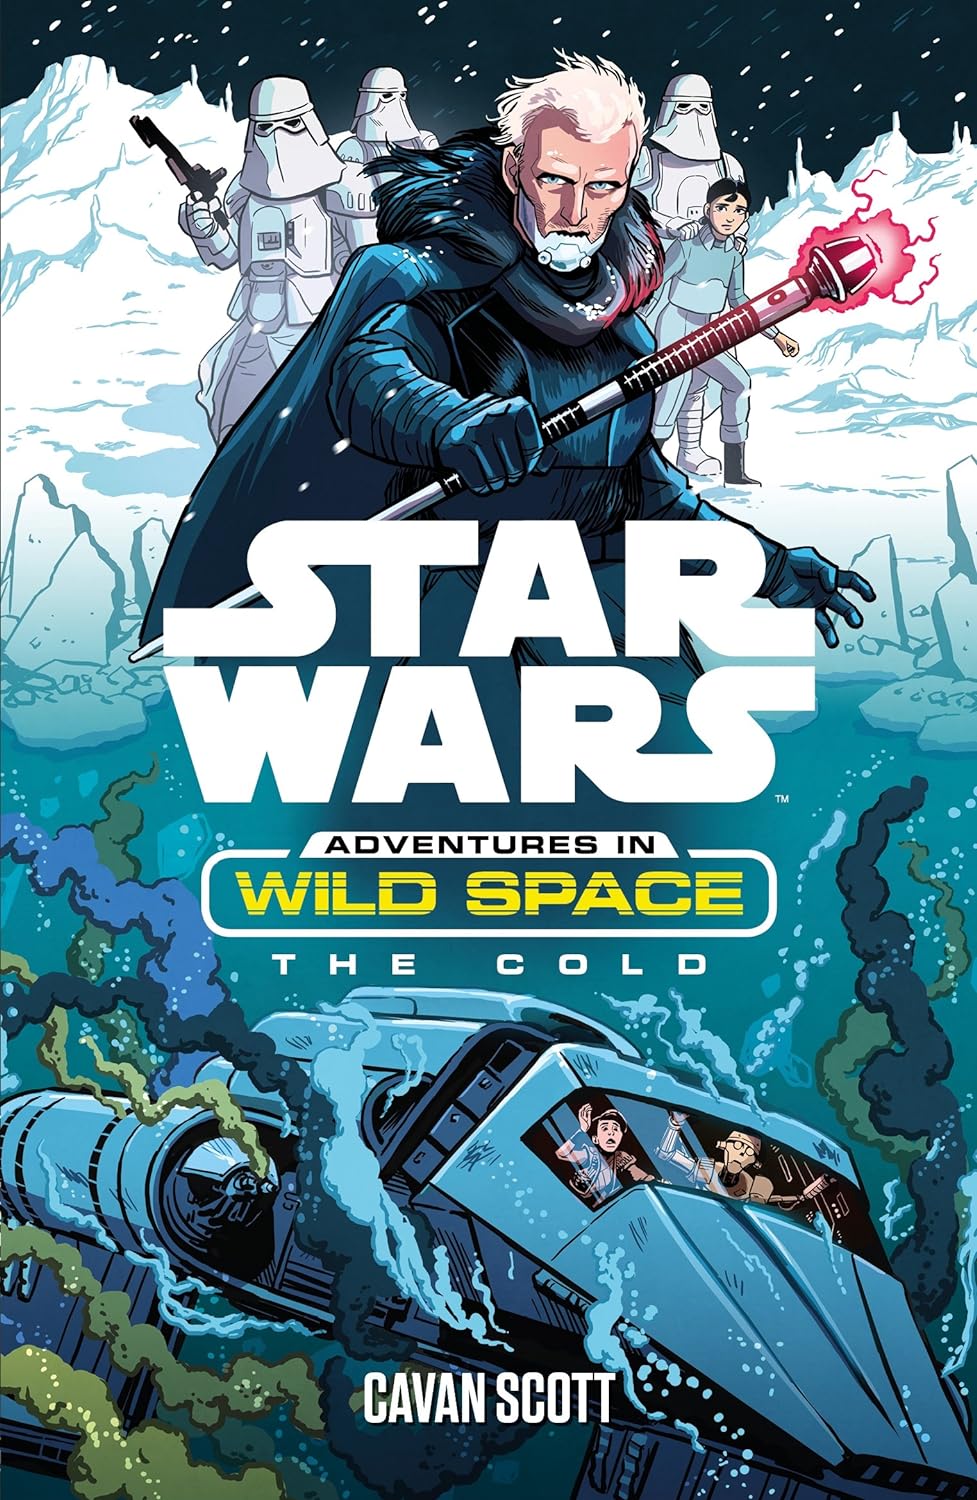 Star Wars: Adventures in Wild Space - the Cold